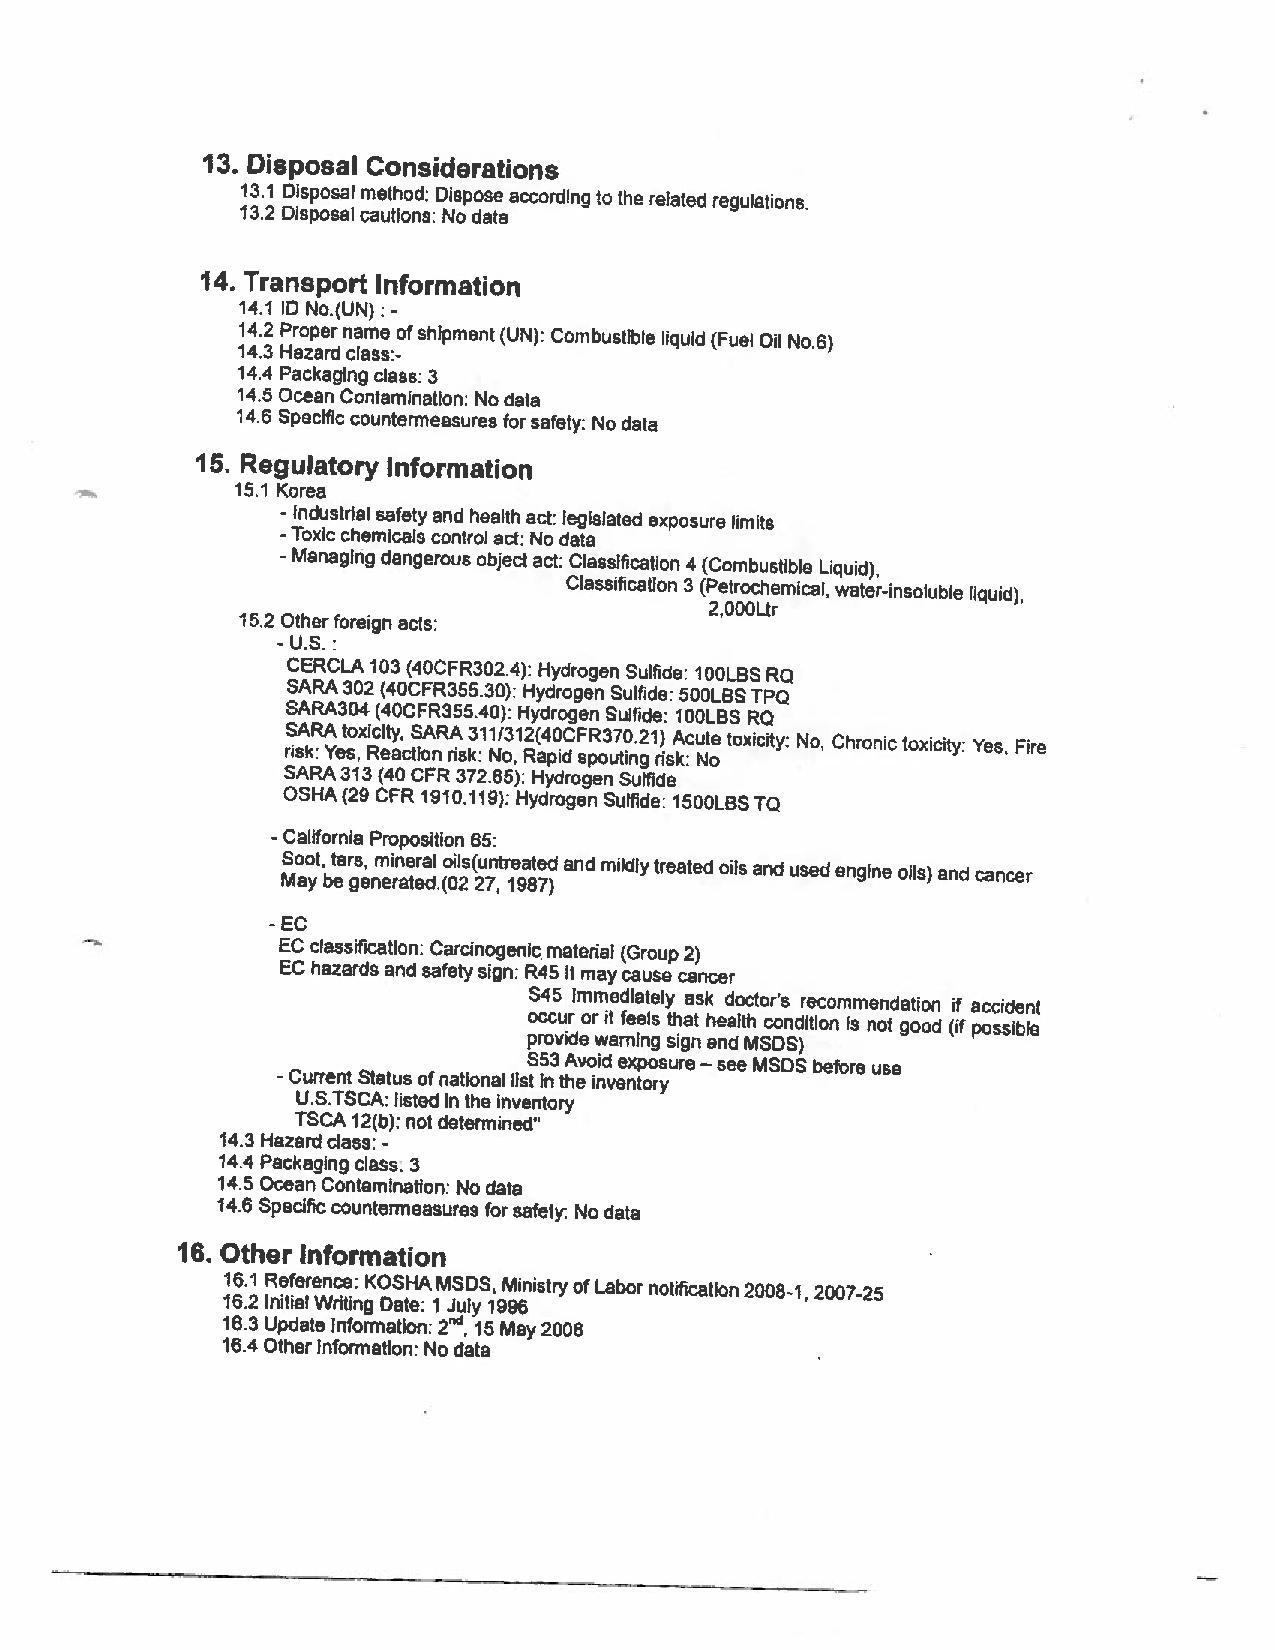 Scan of the 6th page of the M/V Marathassa’s Material Safety Data Sheet 